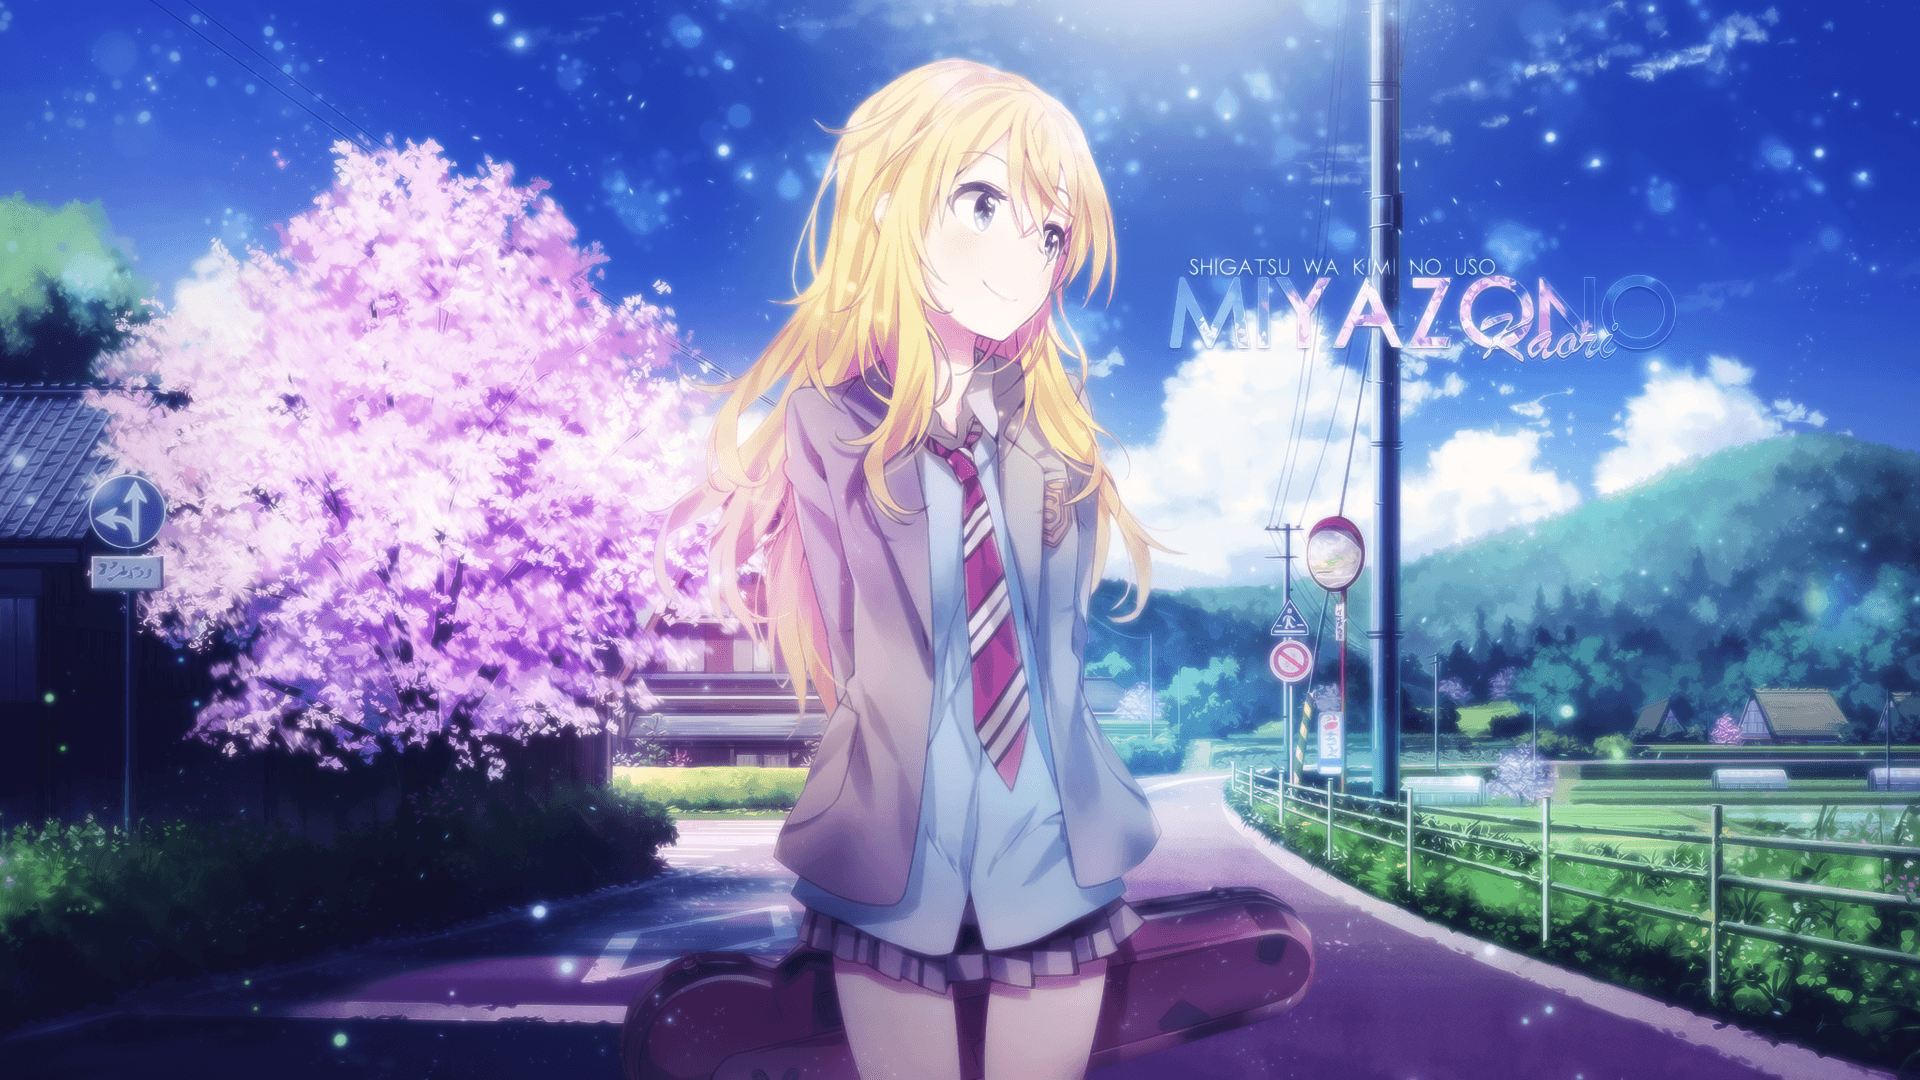 Your Lie In April Wallpapers HD Free download 